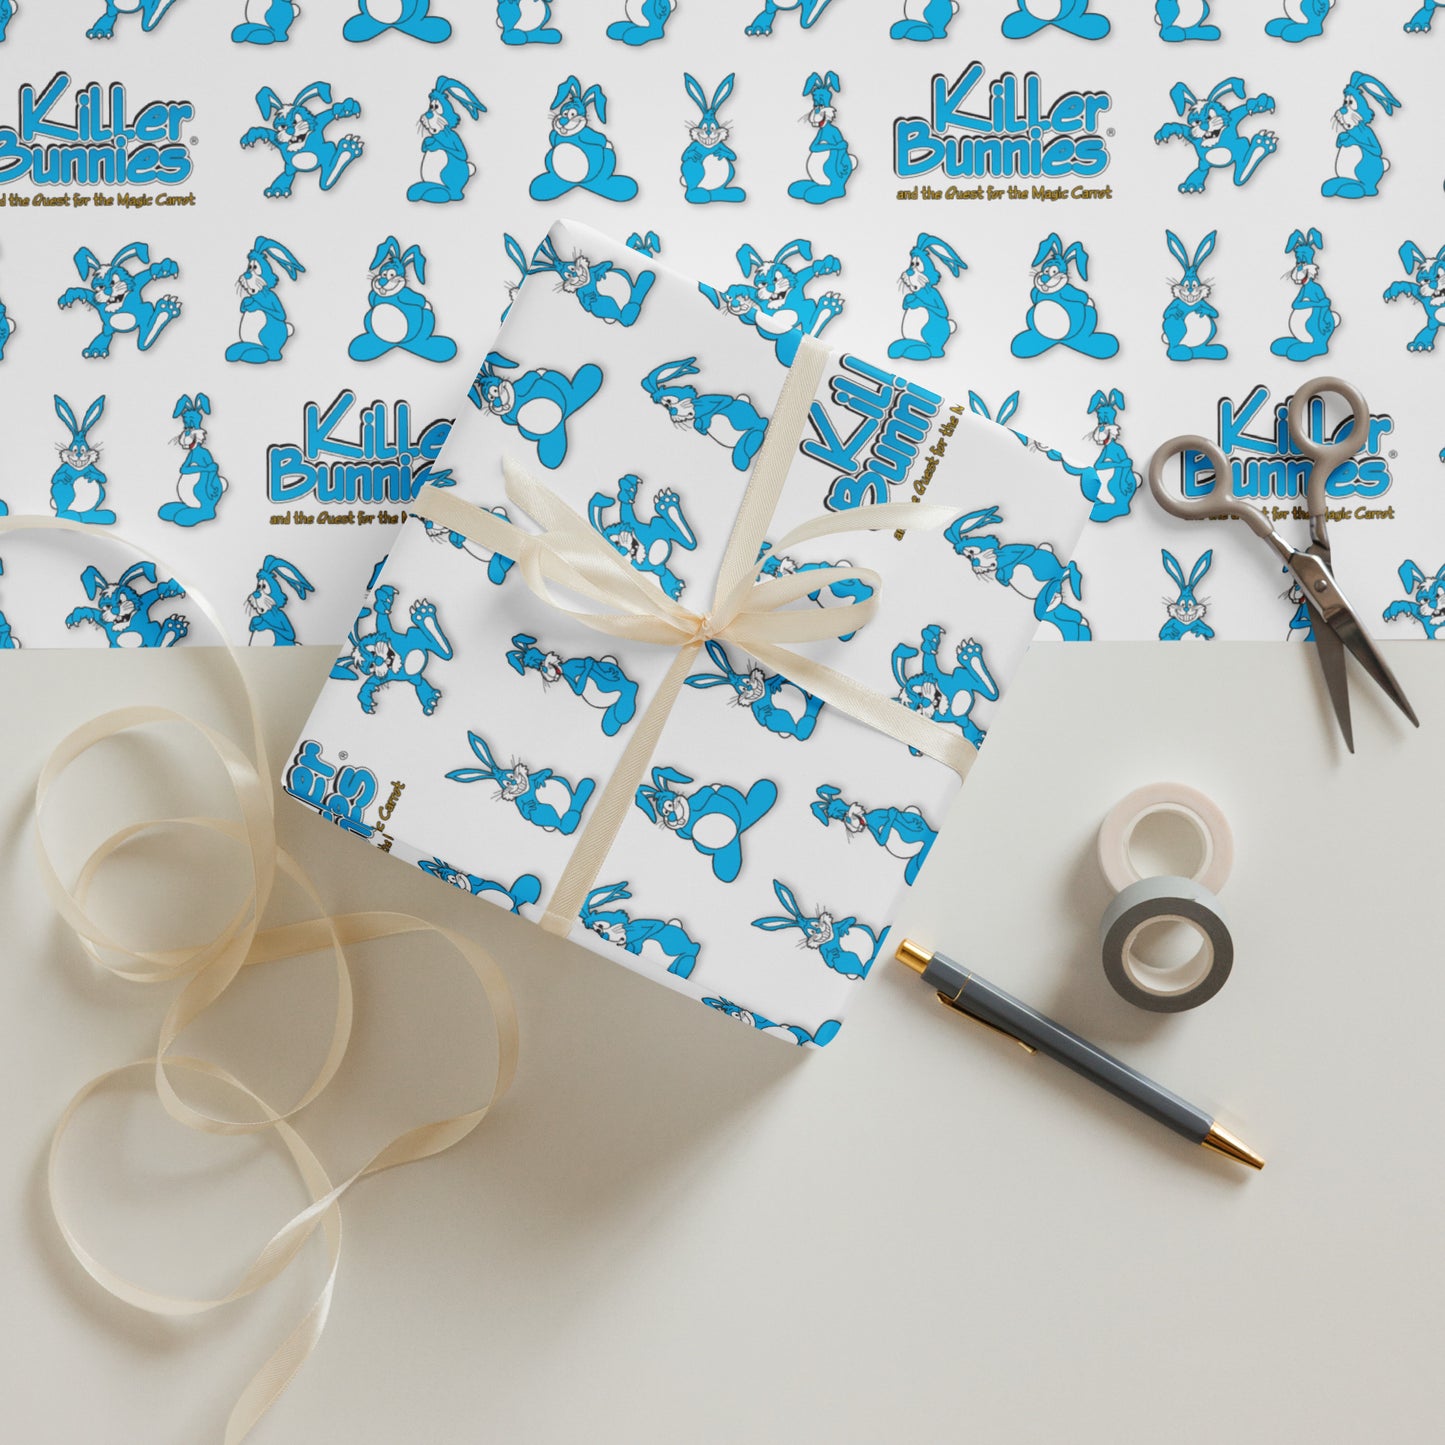 White Killer Bunnies Wrapping Paper Sheets